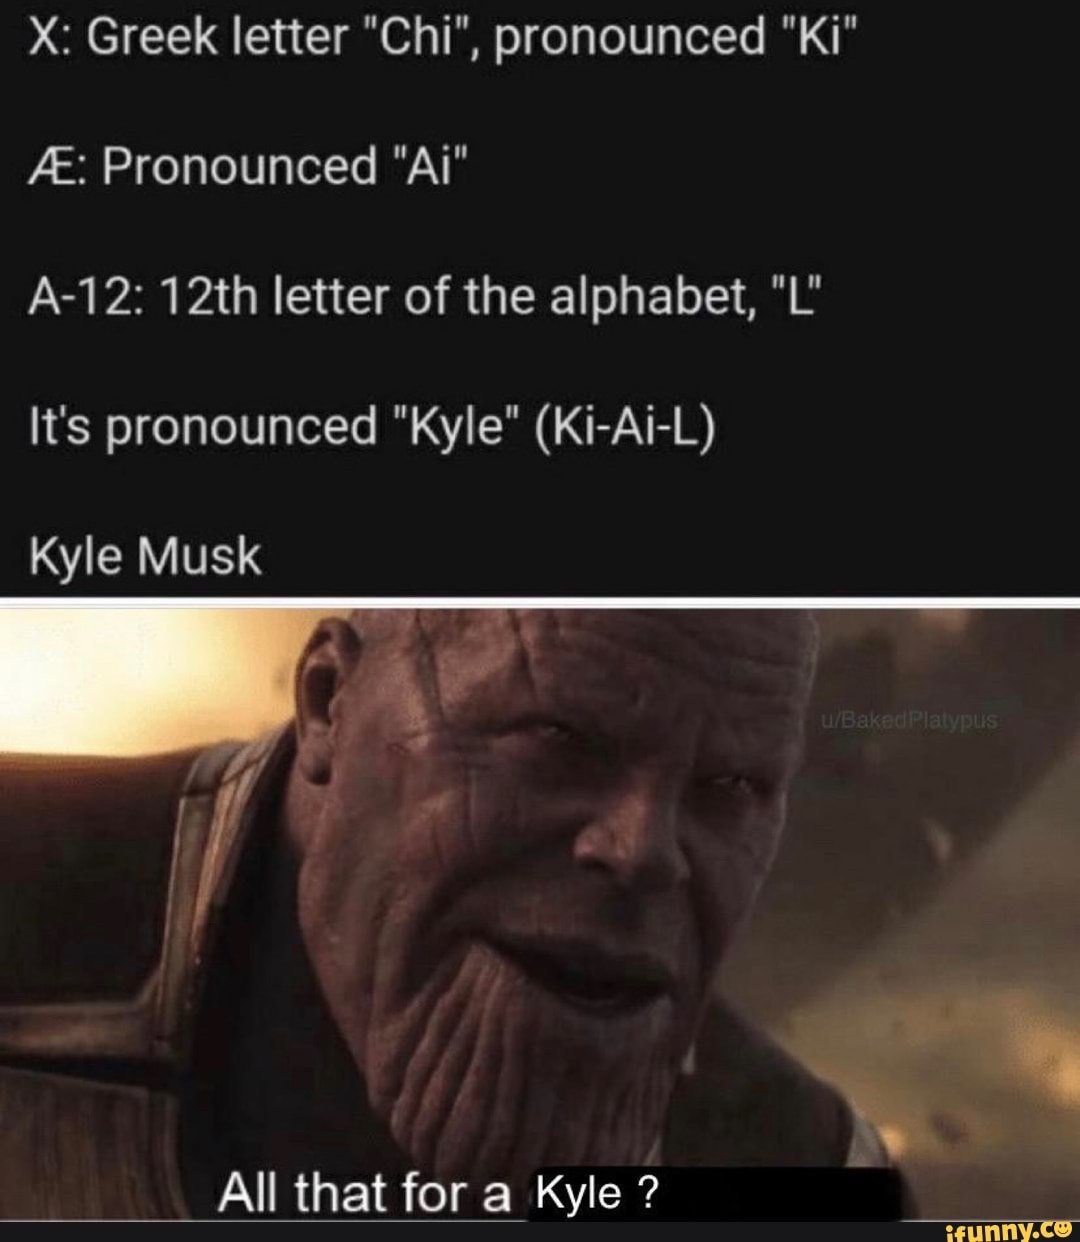 Avengers: Endgame - X Greek letter "Chi", pronounced "Ki" Pronounced "Ai" A12 12th letter of the alphabet, "L" It's pronounced "Kyle" KiAiL Kyle Musk uBaked Platypus All that for a Kyle ? ifunny.co